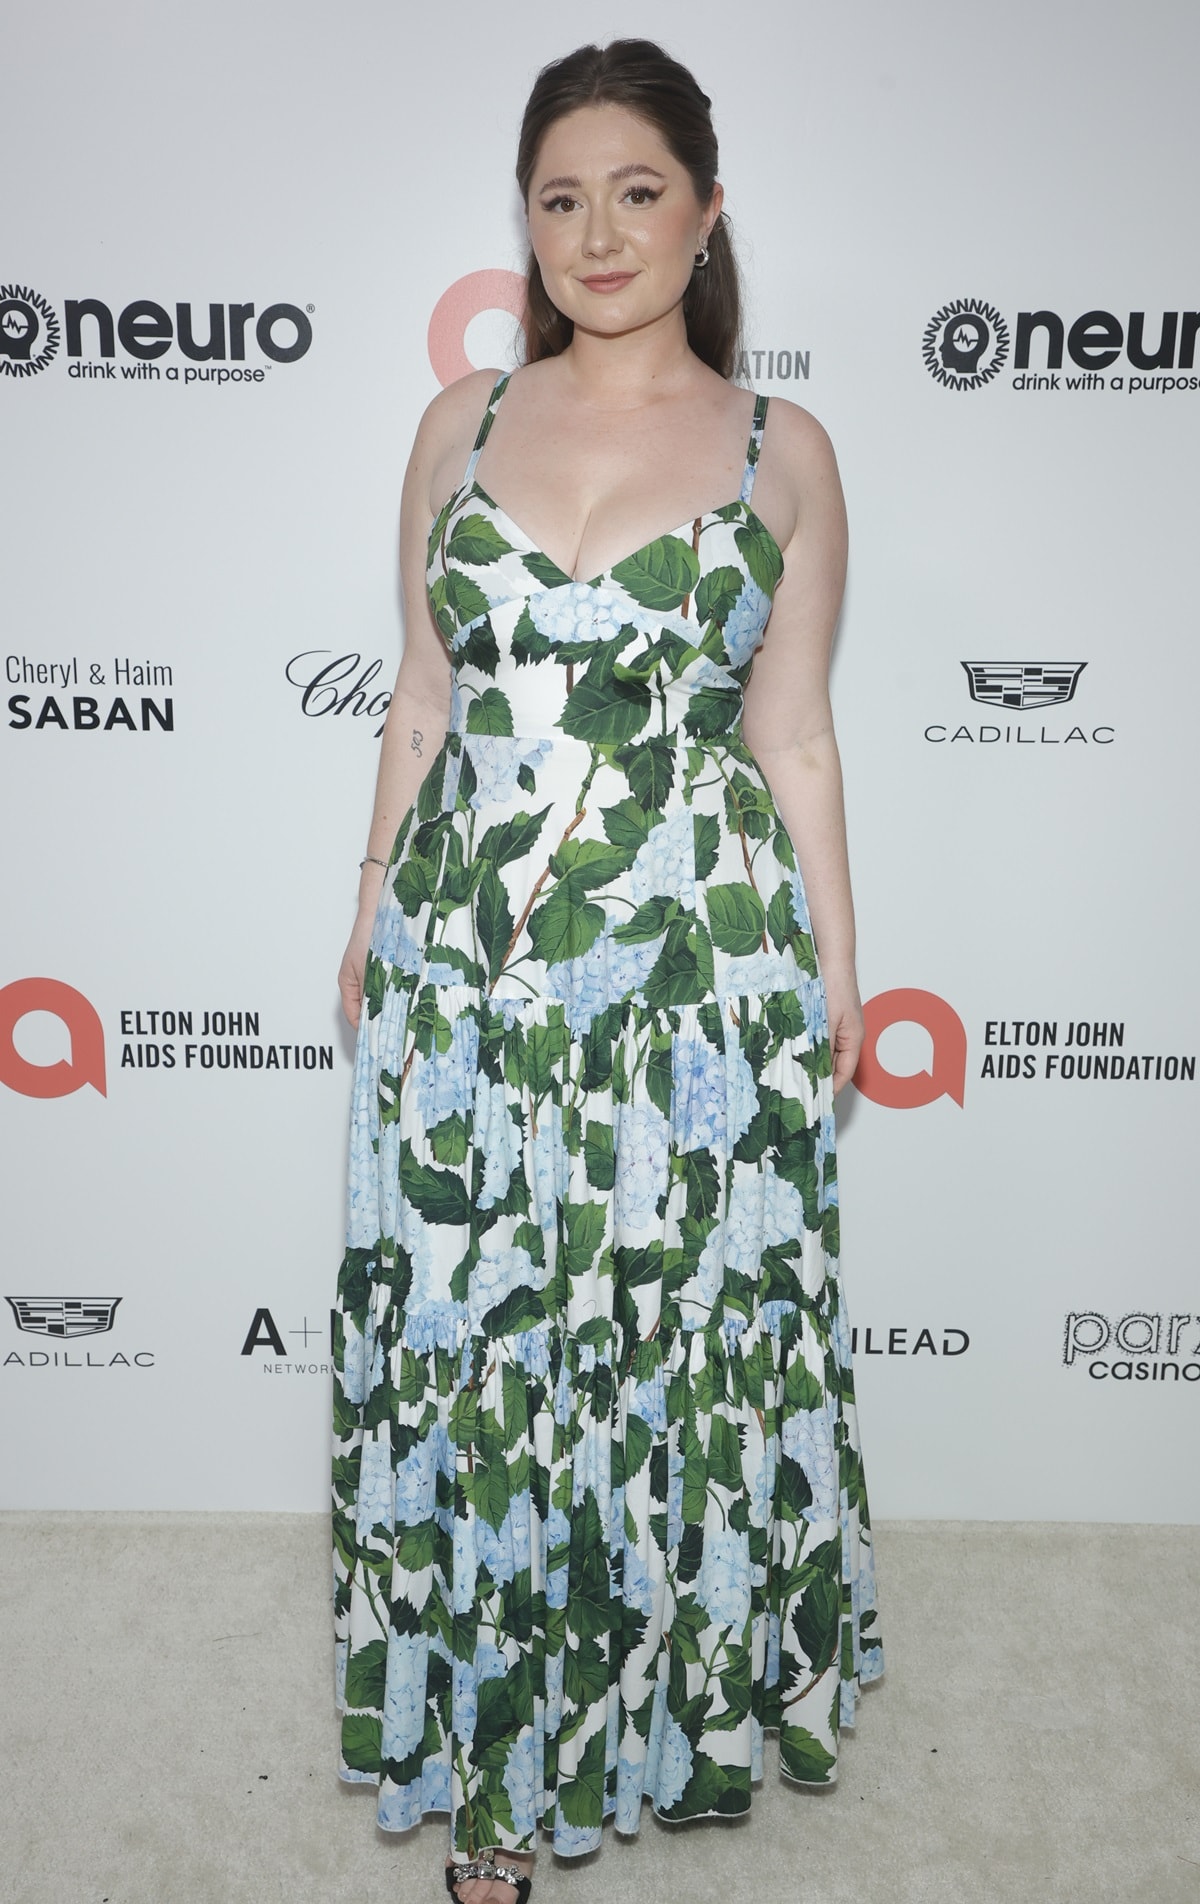 Emma Kenney stunned in a floral dress at the Elton John AIDS Foundation's 31st Annual Academy Awards Viewing Party